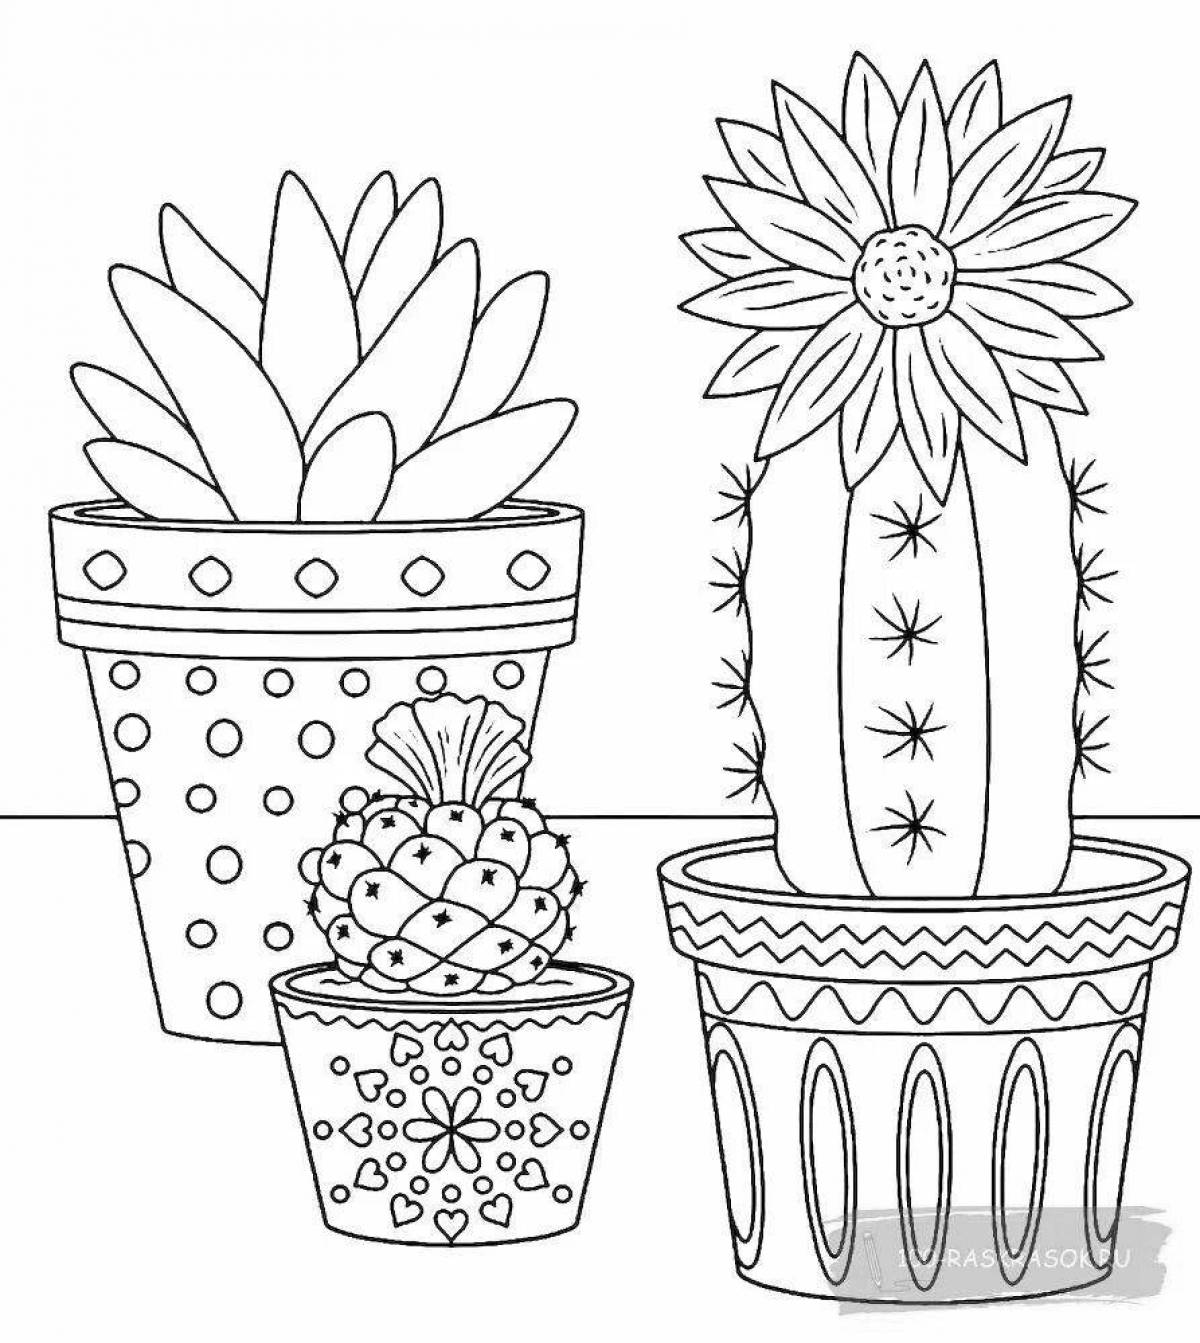 Amazing cactus coloring page for kids